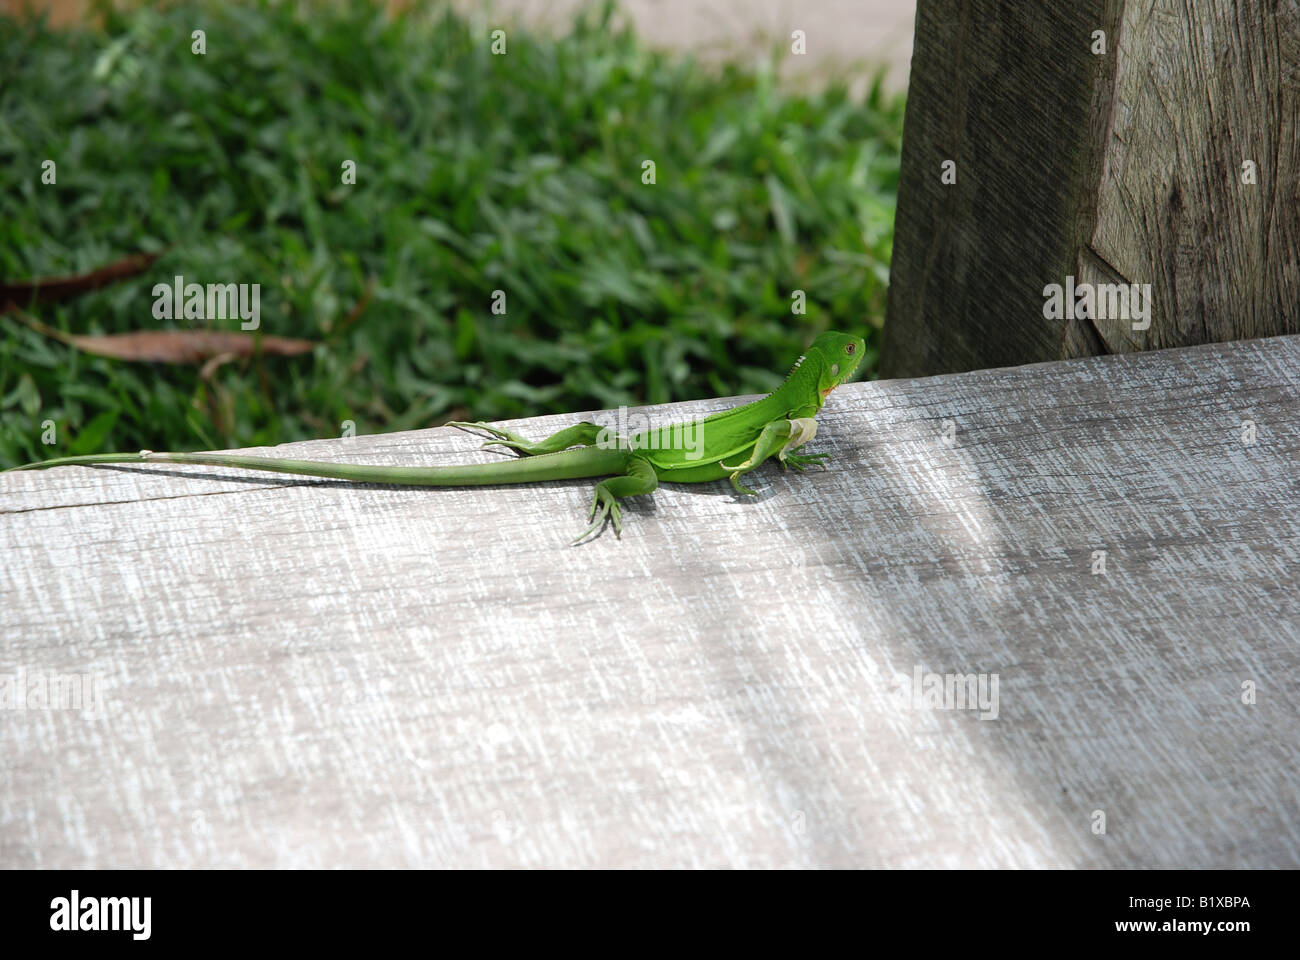 green tropical lizard which is sloughing off Stock Photo